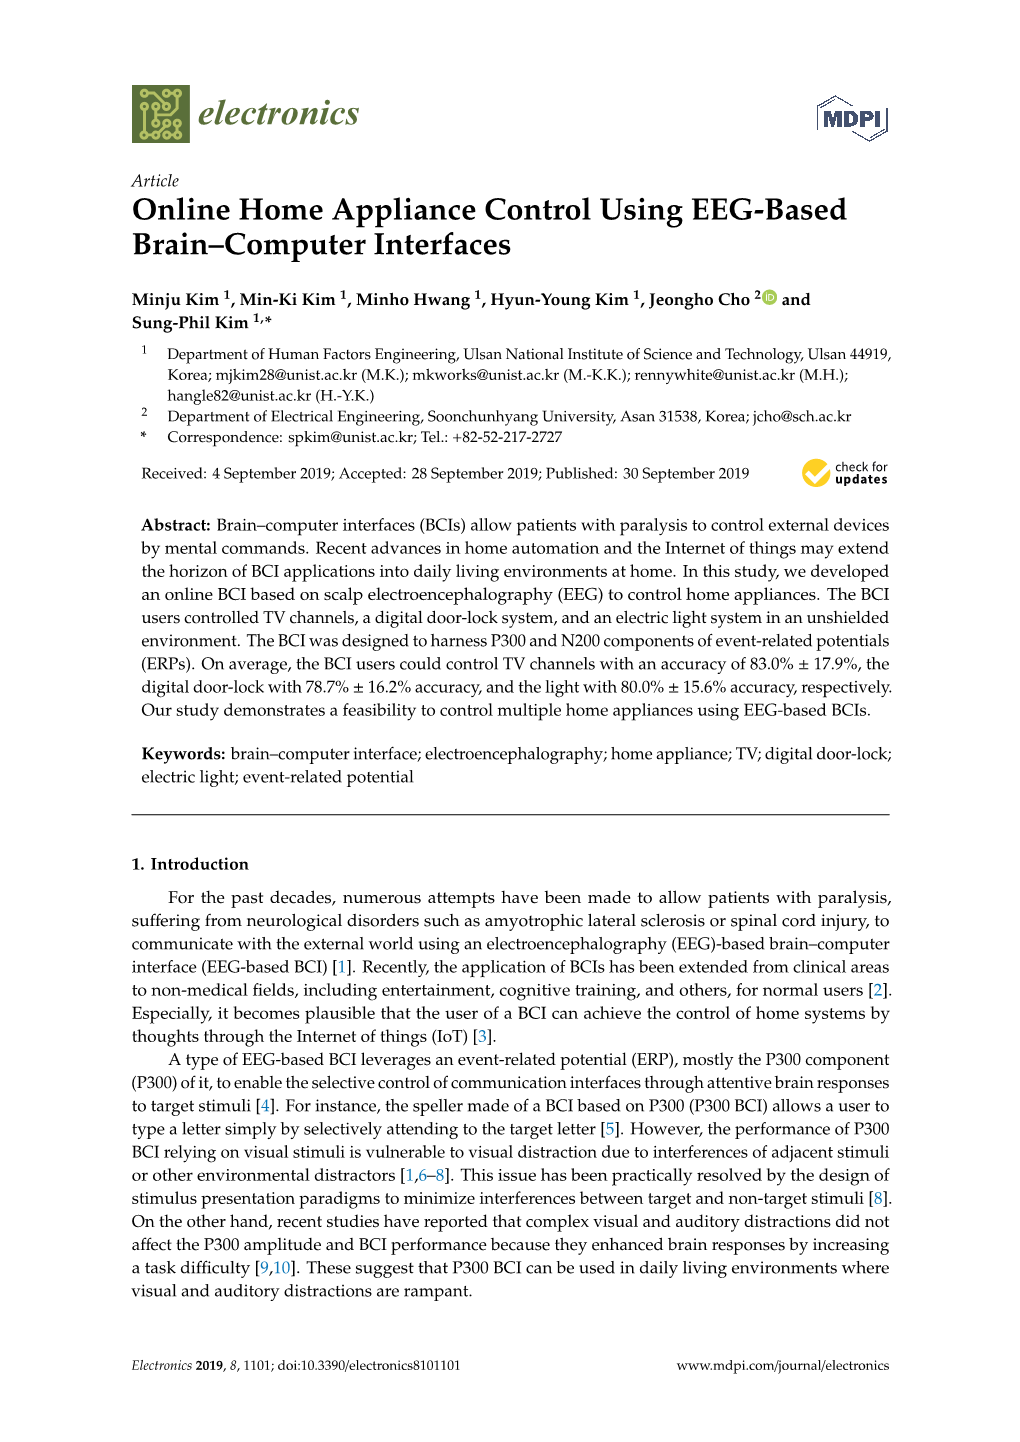 Online Home Appliance Control Using EEG-Based Brain–Computer Interfaces